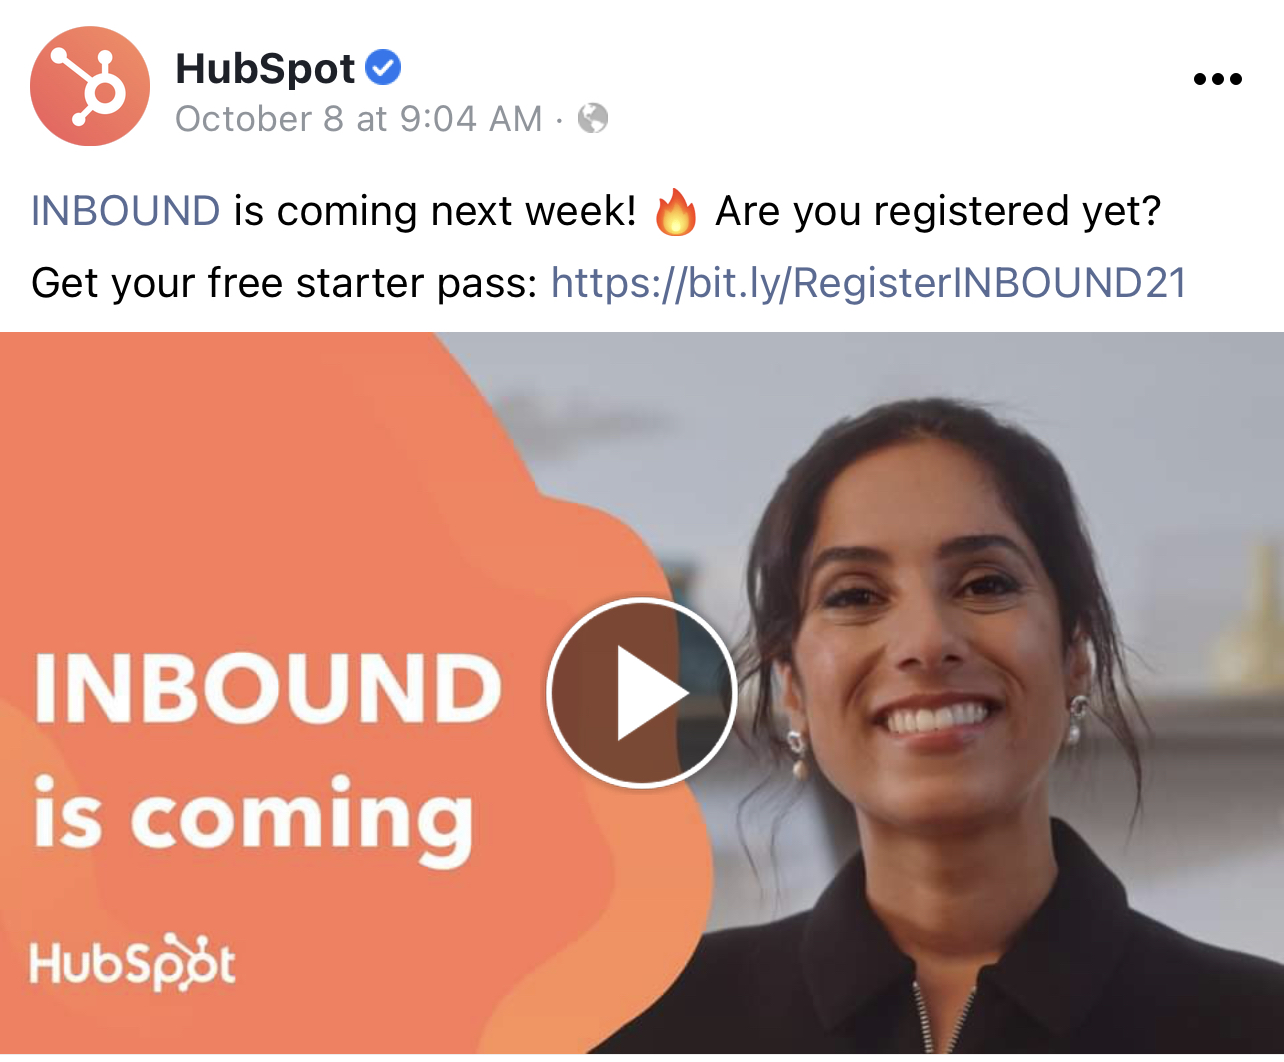 Example of a video post used on Facebook to attract new subscribers via a webinar event hosted by HubSpot